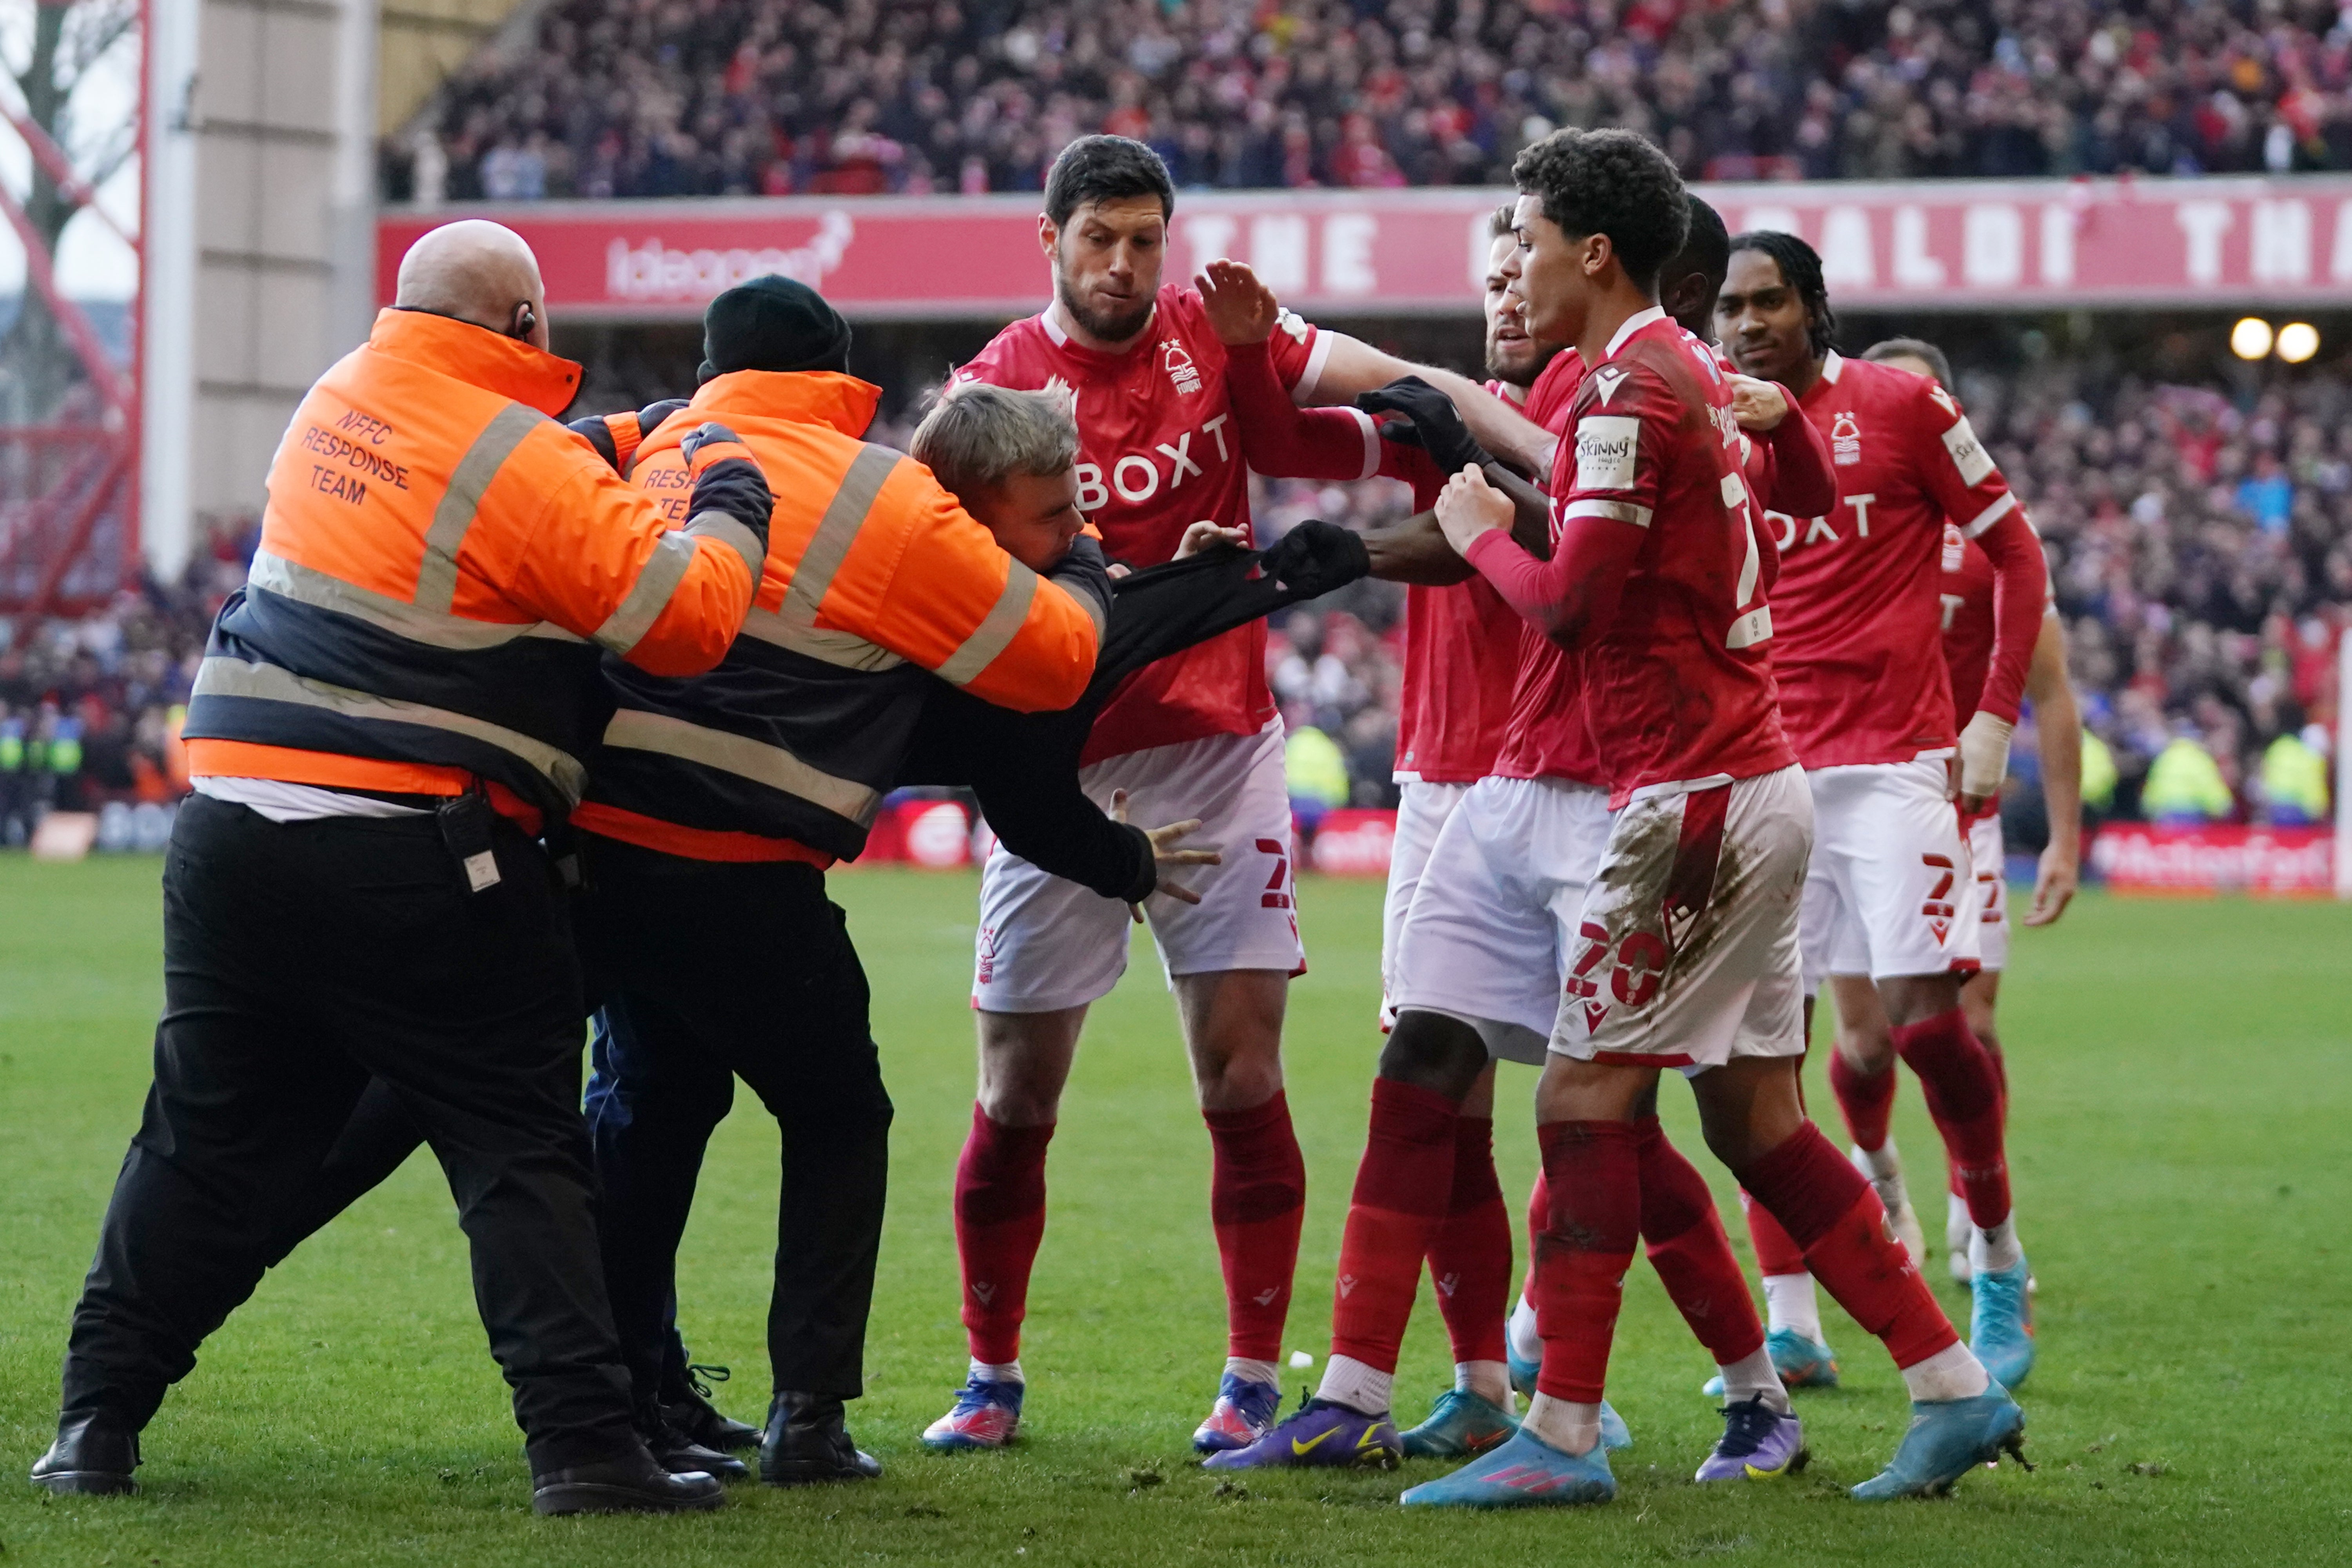 Stewards try to restrain a Leicester fan as he assaults Nottingham Forest players in an FA Cup tie earlier this season (Tim Goode/PA)